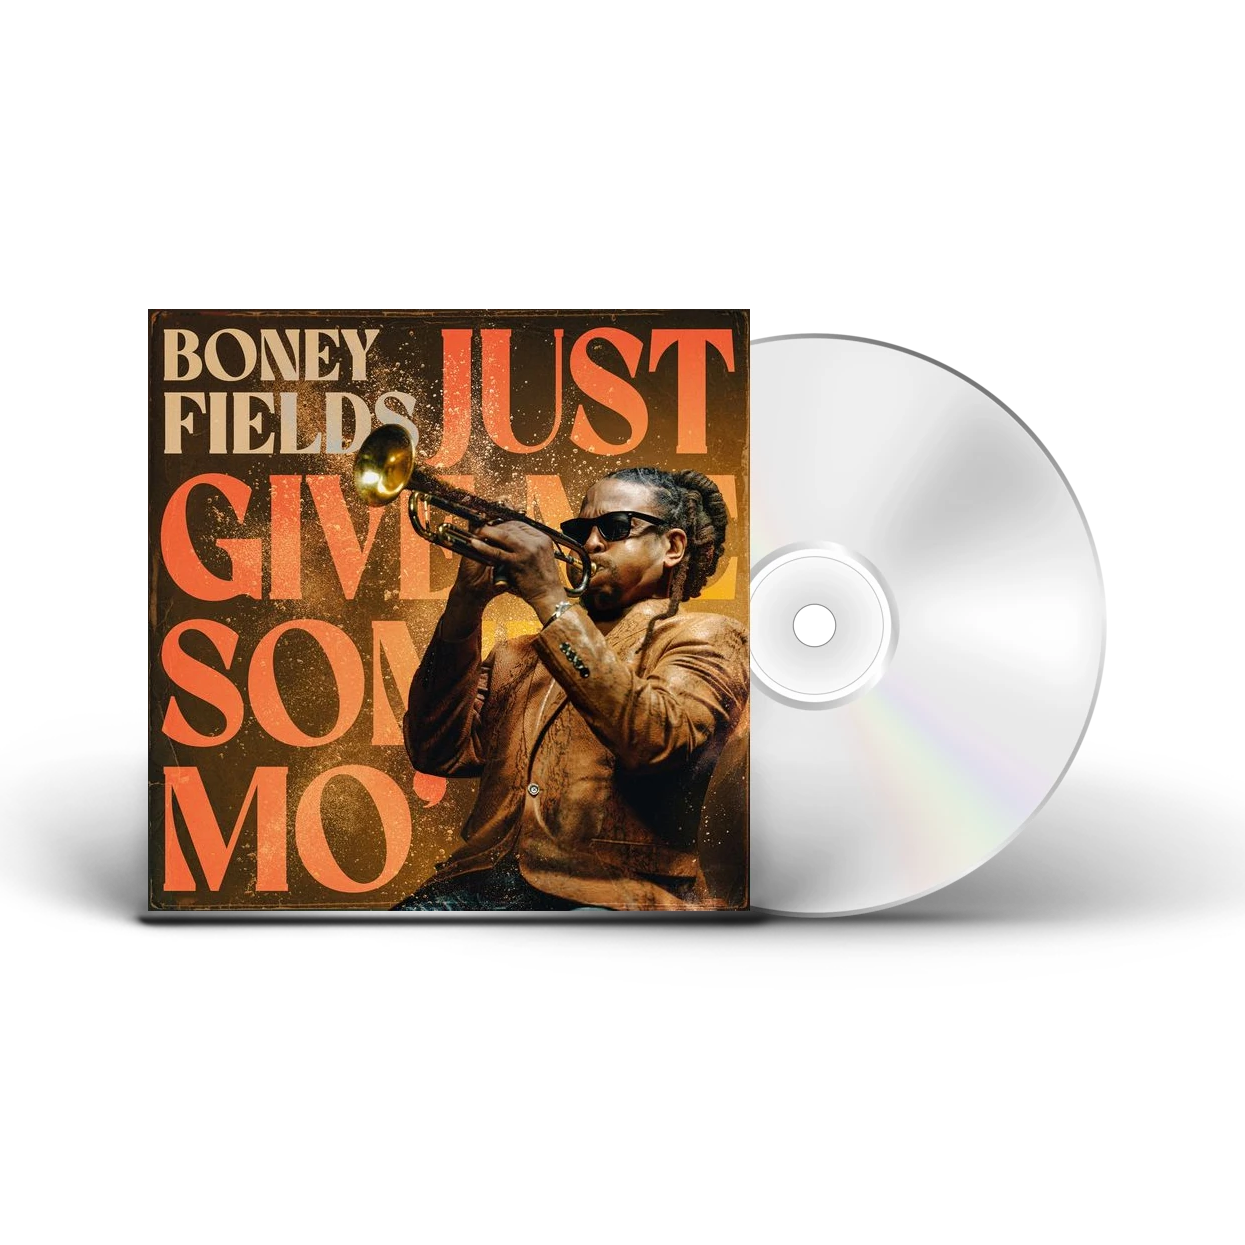 Boney Fields - Just Give Me Some Mo': CD